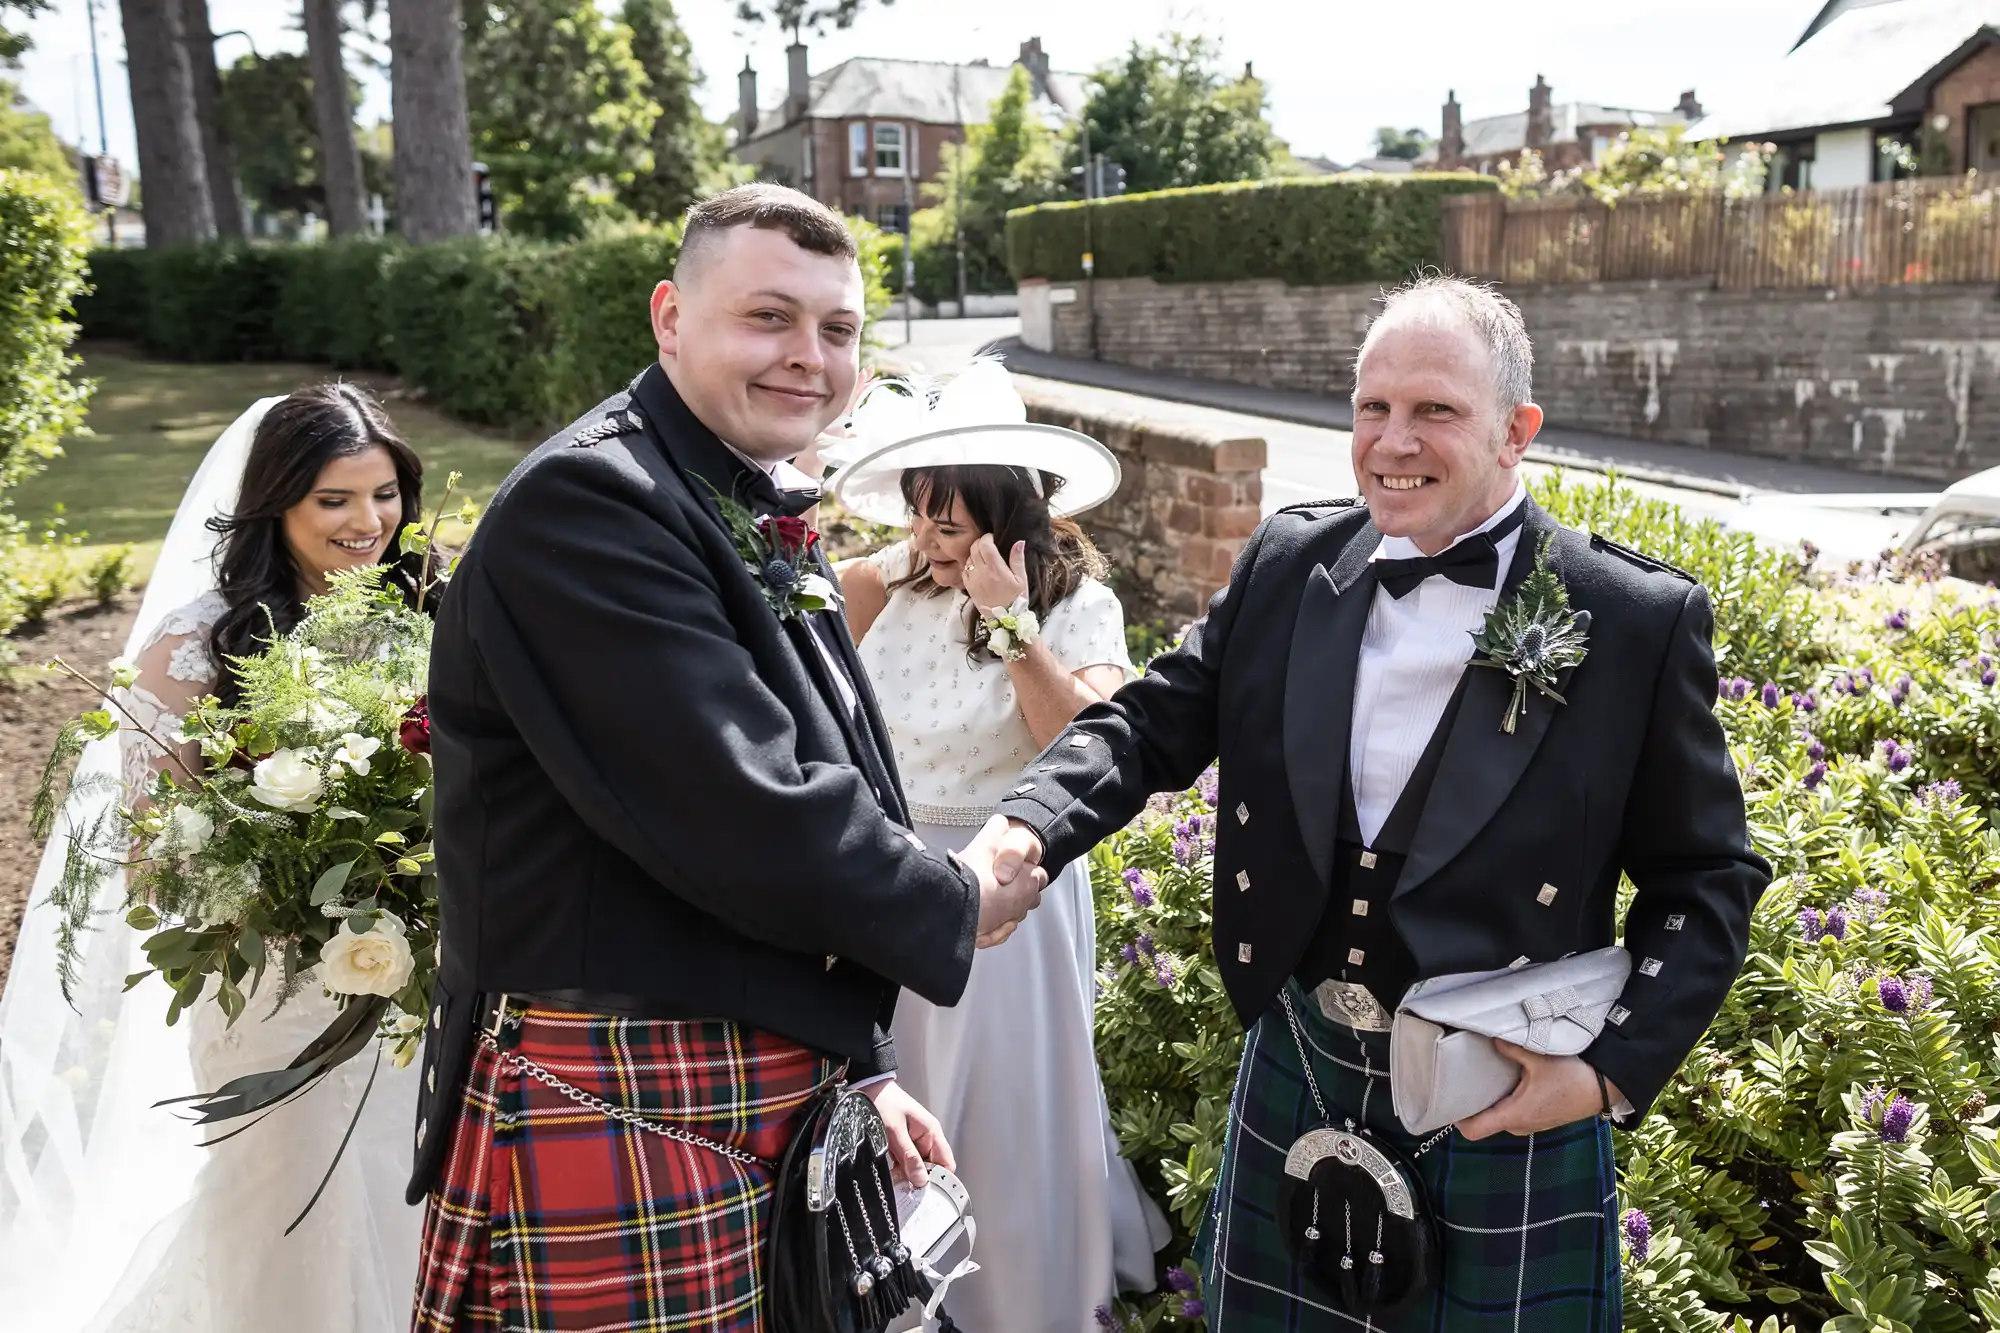 A groom in a kilt shaking hands with father of the bride in a kilt at a wedding, with a bride and another woman in the background.